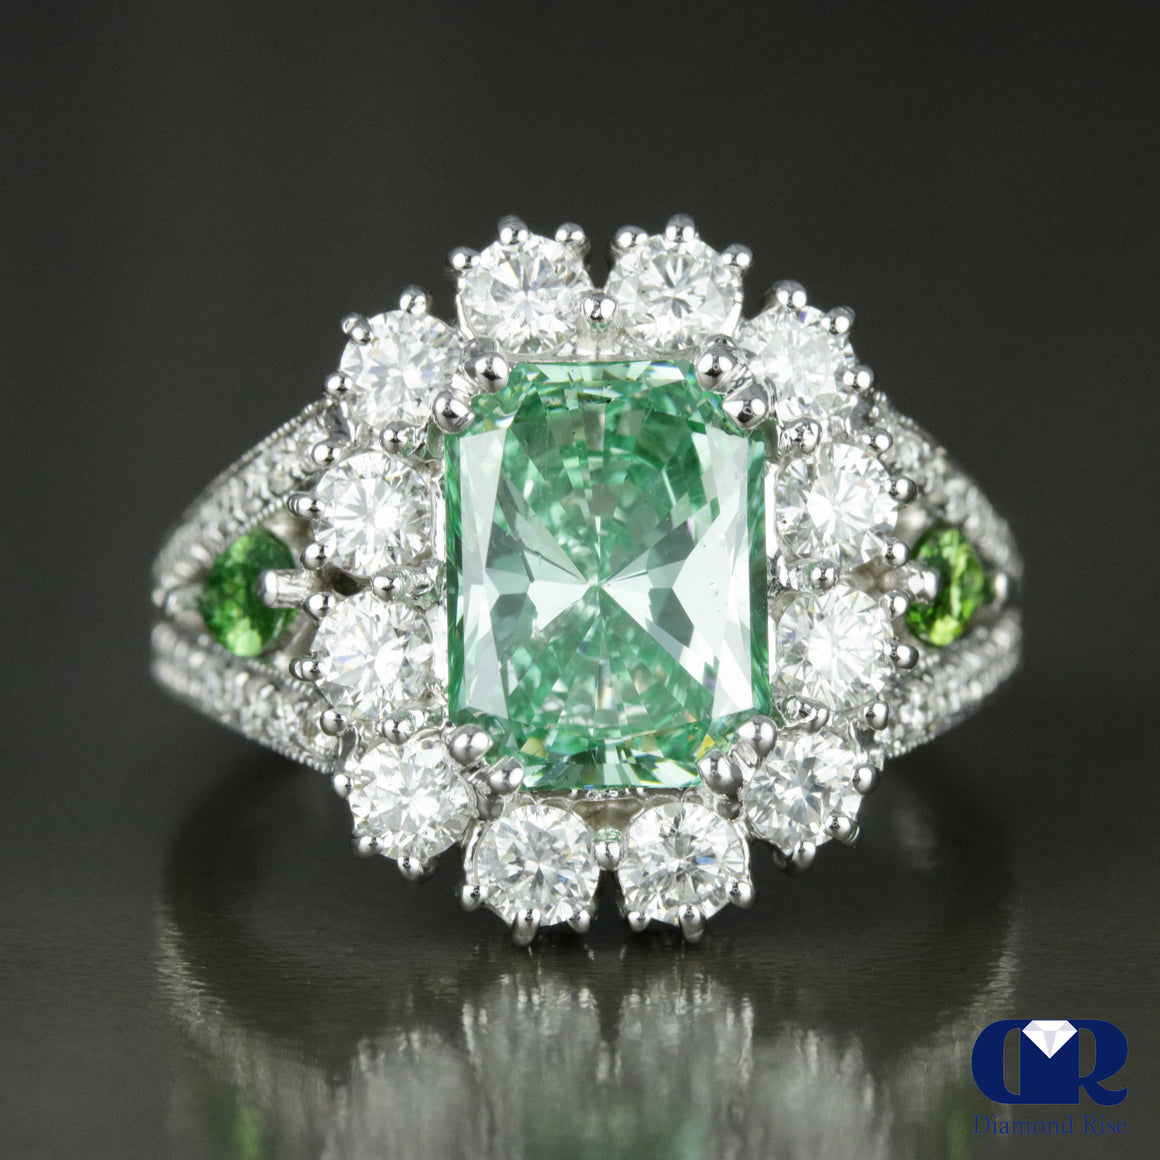 3.90 Carat Fancy Green Radiant Cut Diamond Halo Engagement Ring In 14K White Gold - Diamond Rise Jewelry